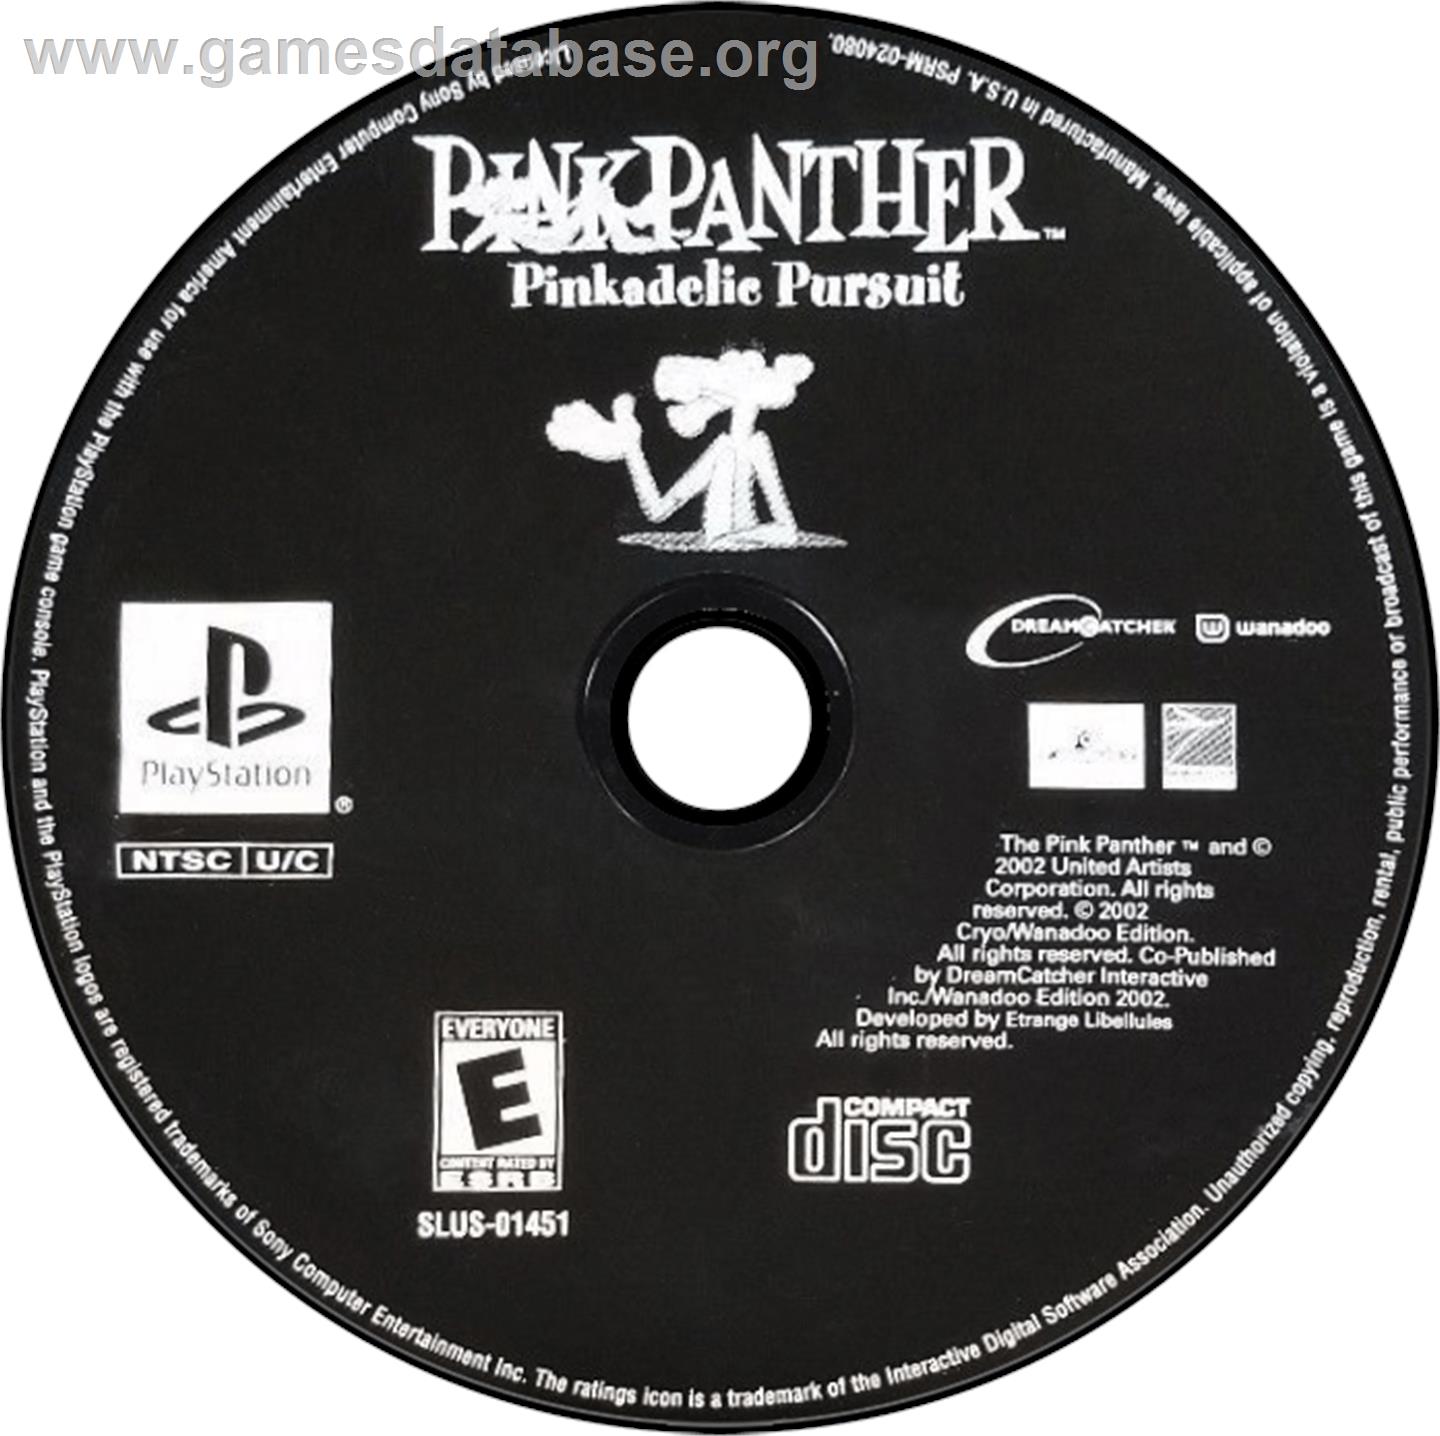 Pink Panther: Pinkadelic Pursuit - Sony Playstation - Artwork - Disc